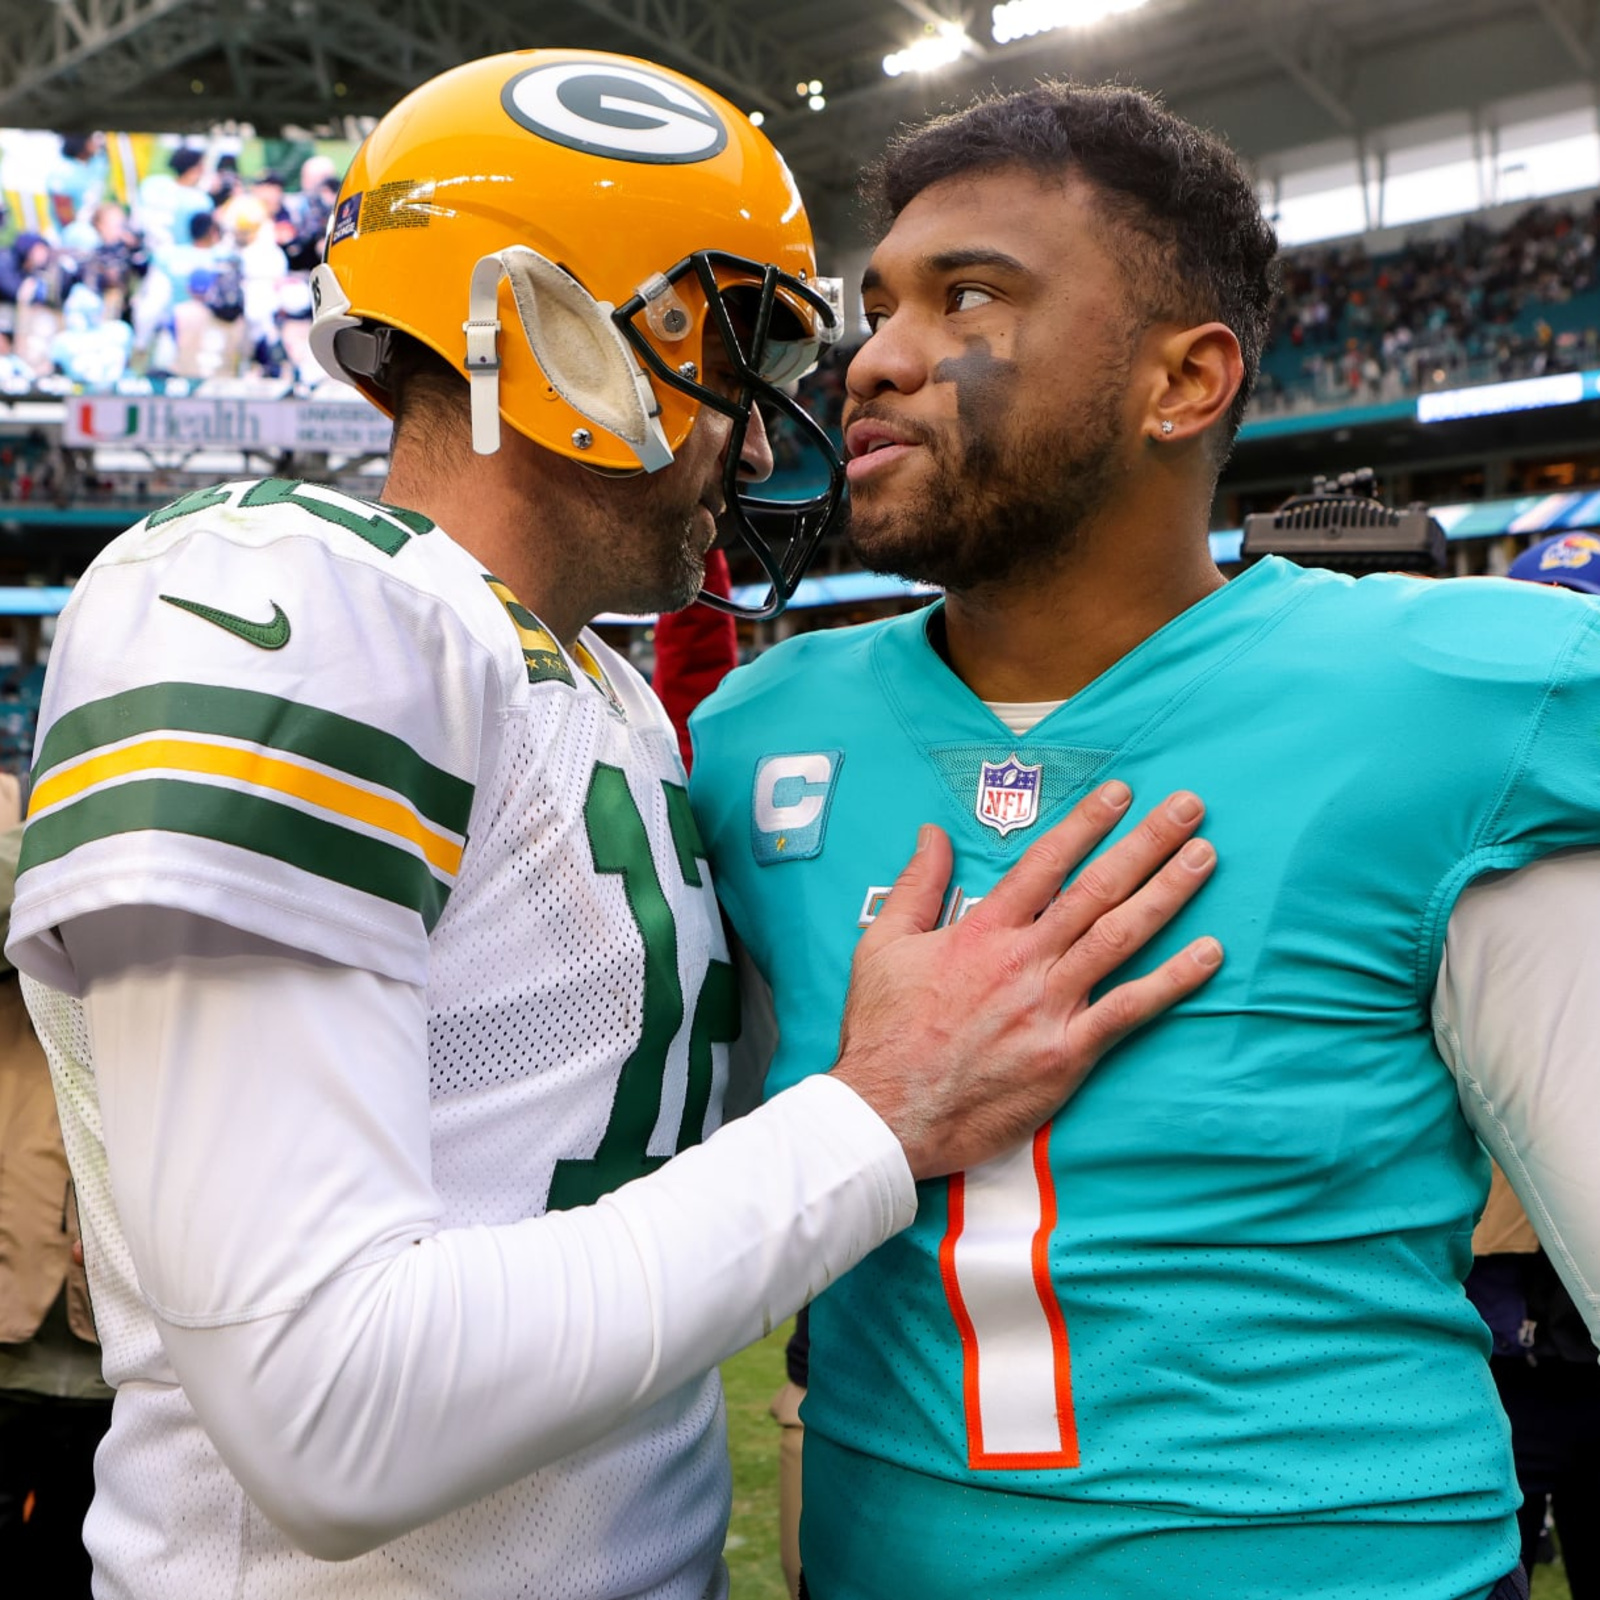 Green Bay Packers 26 vs 20 Miami Dolphins summary: stats and highlights